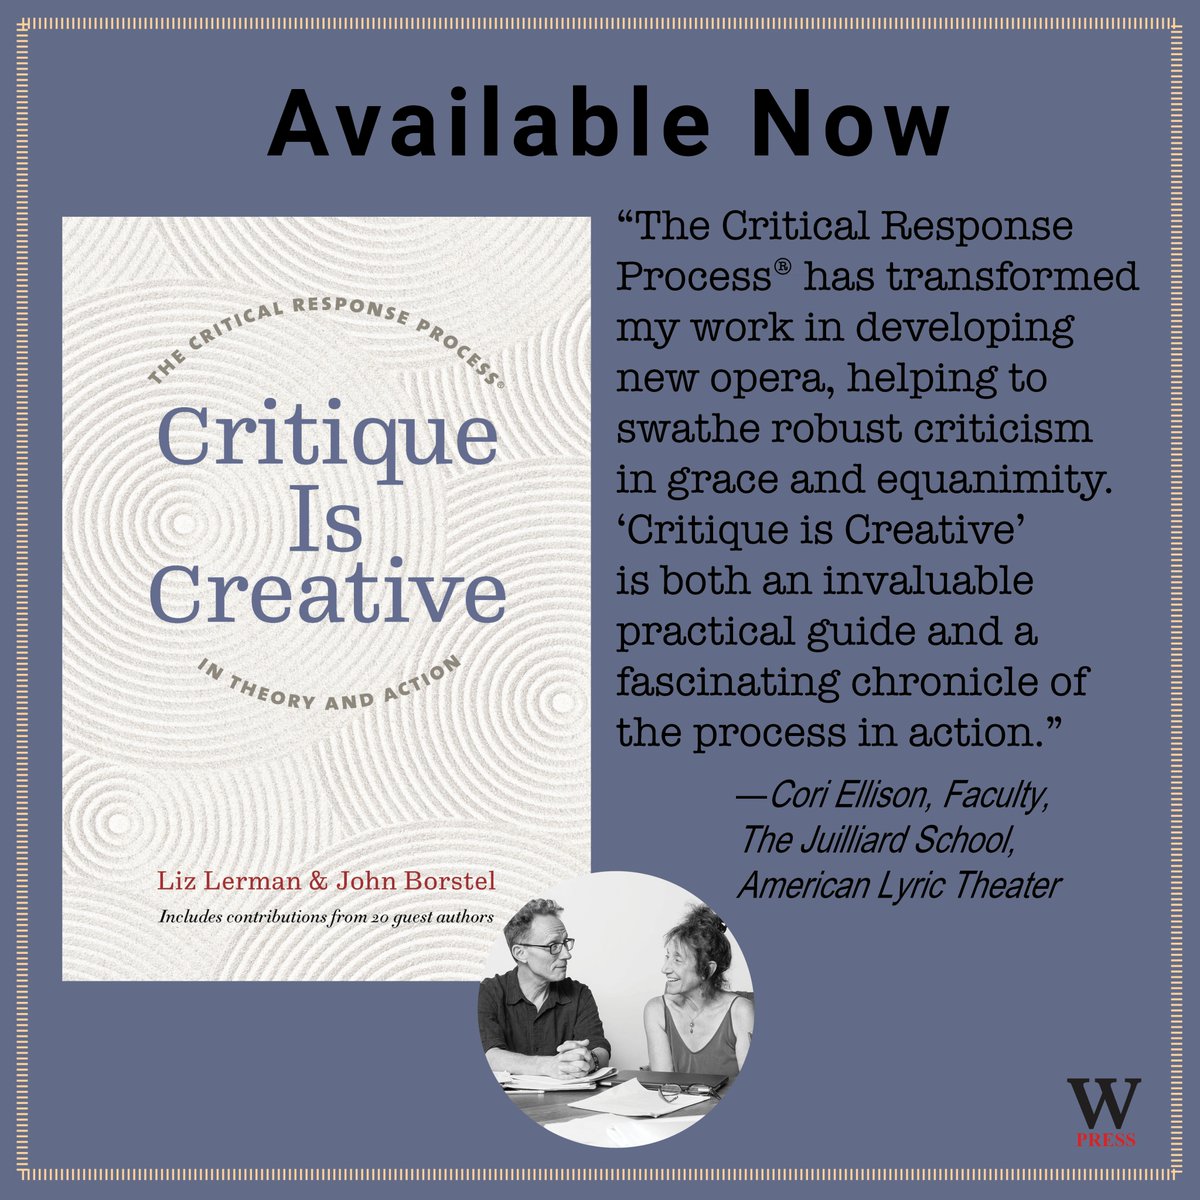 test Twitter Media - "Critique Is Creative: The Critical Response Process® in Theory and Action" by Liz Lerman & John Borstel w/ a host of eclectic contributors from various disciplines. Use code Q301 at https://t.co/hisEkUfeO6 for 30% off.  #LizLerman #JohnBorstel #criticalresponseprocess https://t.co/FWYPKHtEHk